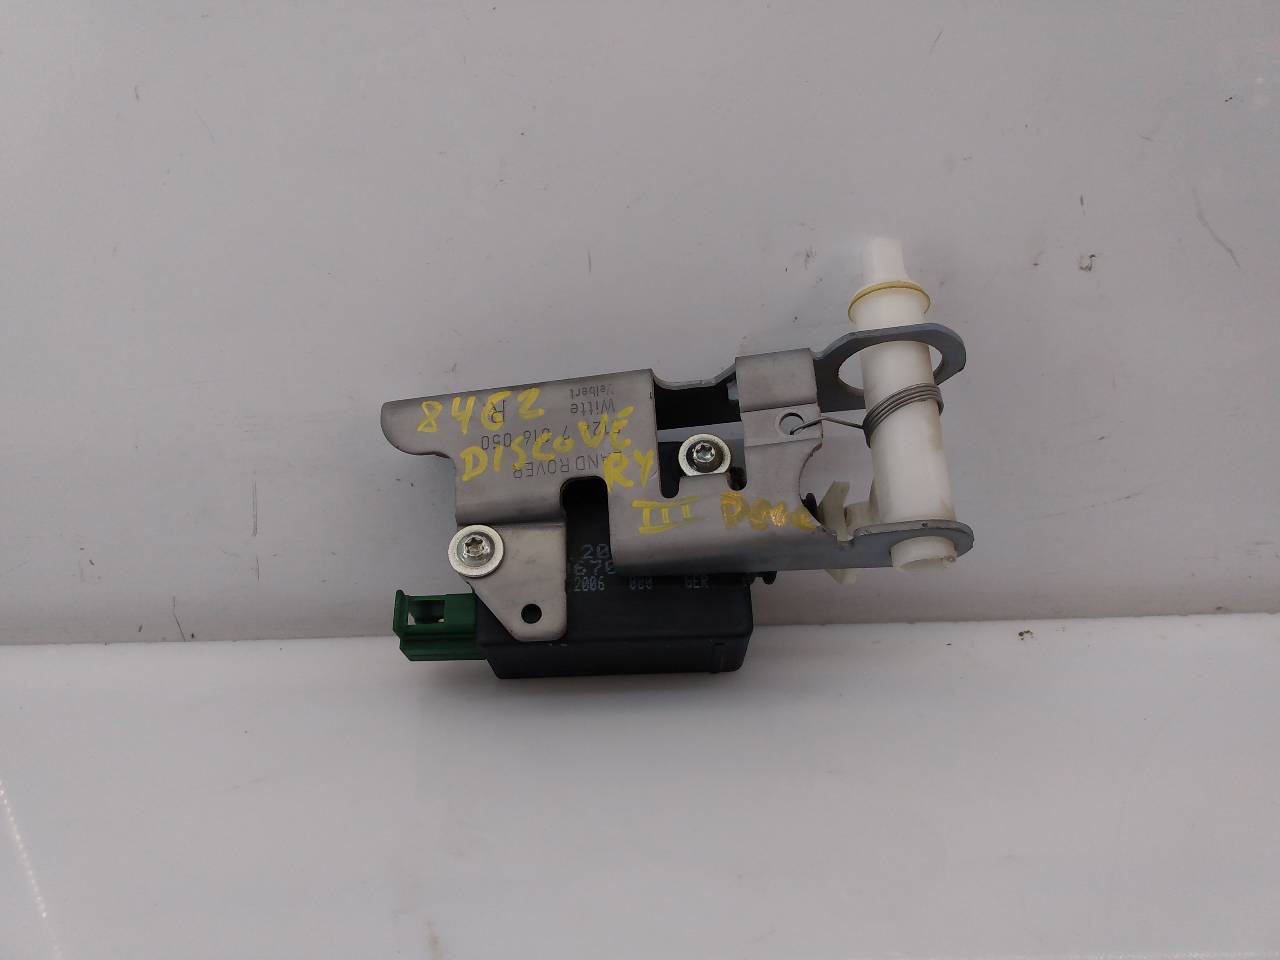 LAND ROVER Discovery 3 generation (2004-2009) Tailgate Boot Lock CWC500020, 51247016050, E1-B4-7-2 24032861